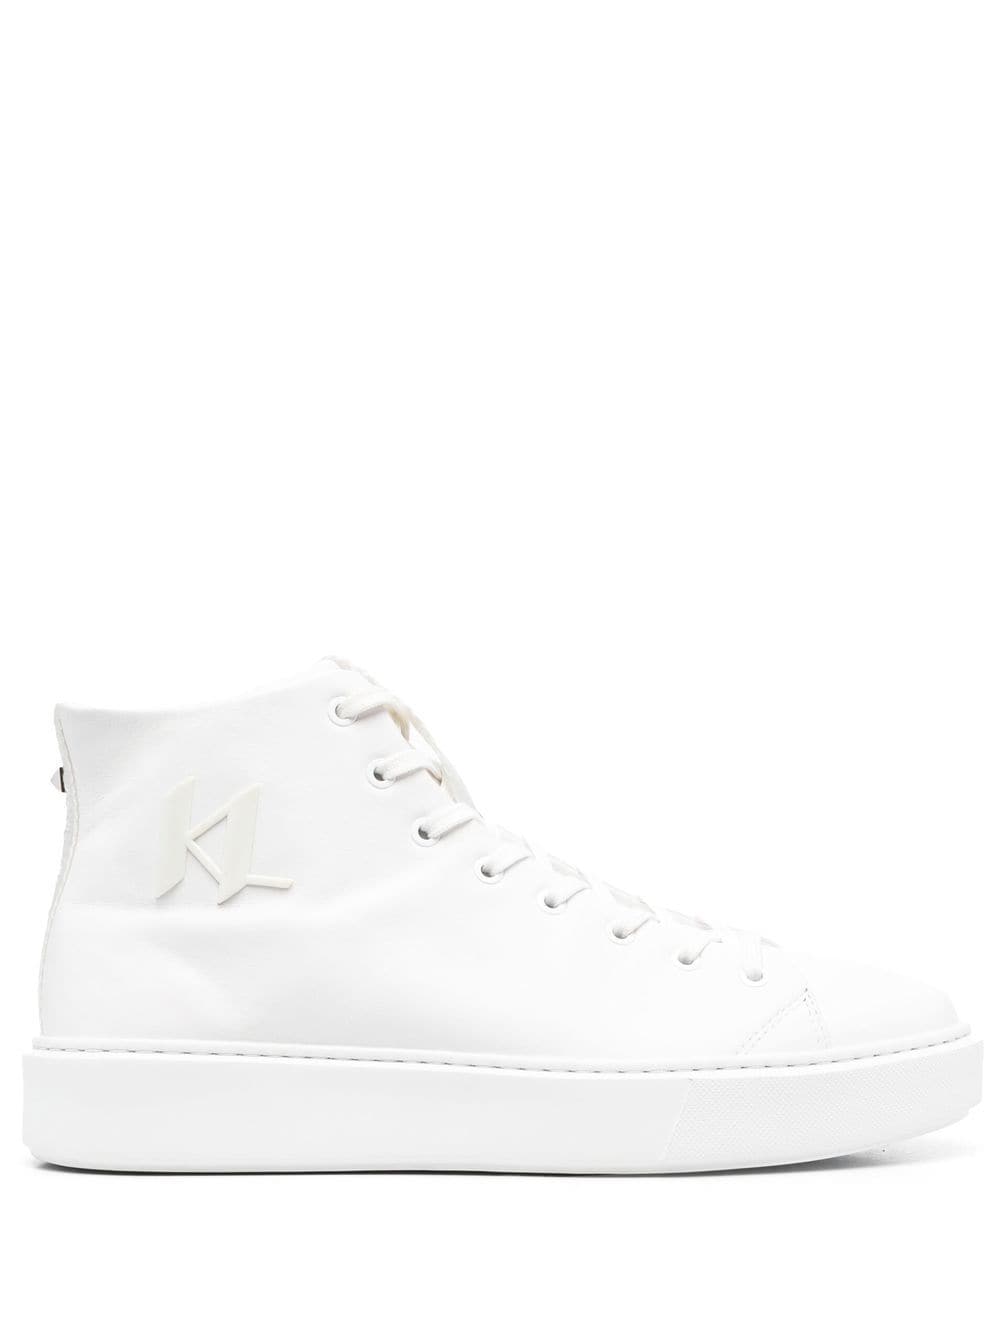 Karl Lagerfeld Maxi Kup High-top Trainers In White